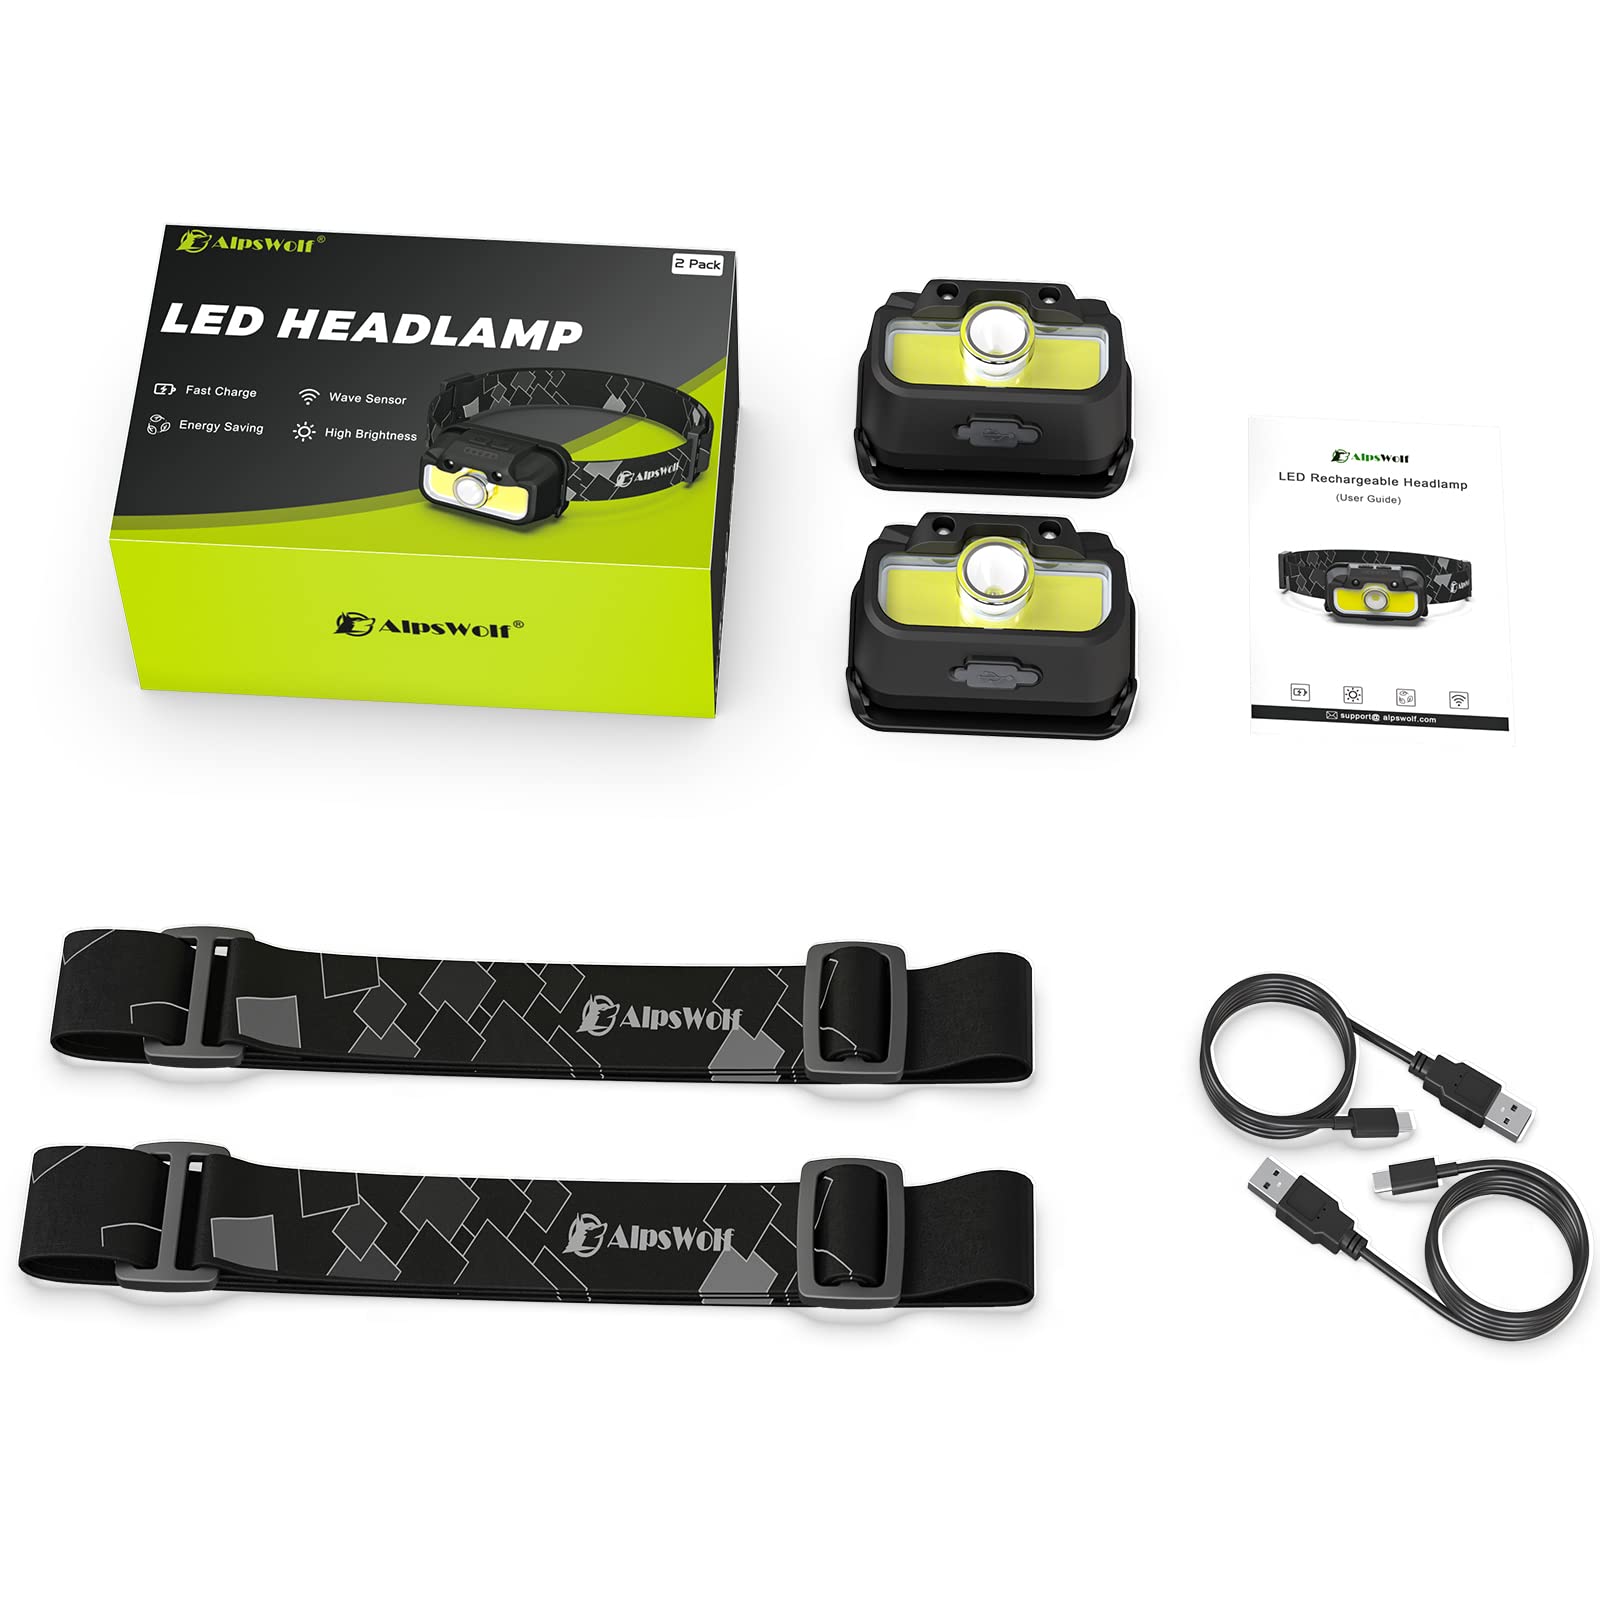 AlpsWolf Headlamp Rechargeable, 2 Pack Adjustable Head Lamp, 7 Lighting Modes Headlight for Adults and Kids, LED Headlamp with Motion Sensor, Headlamp Flashlights for Outdoor Camping, Hiking, Cycling